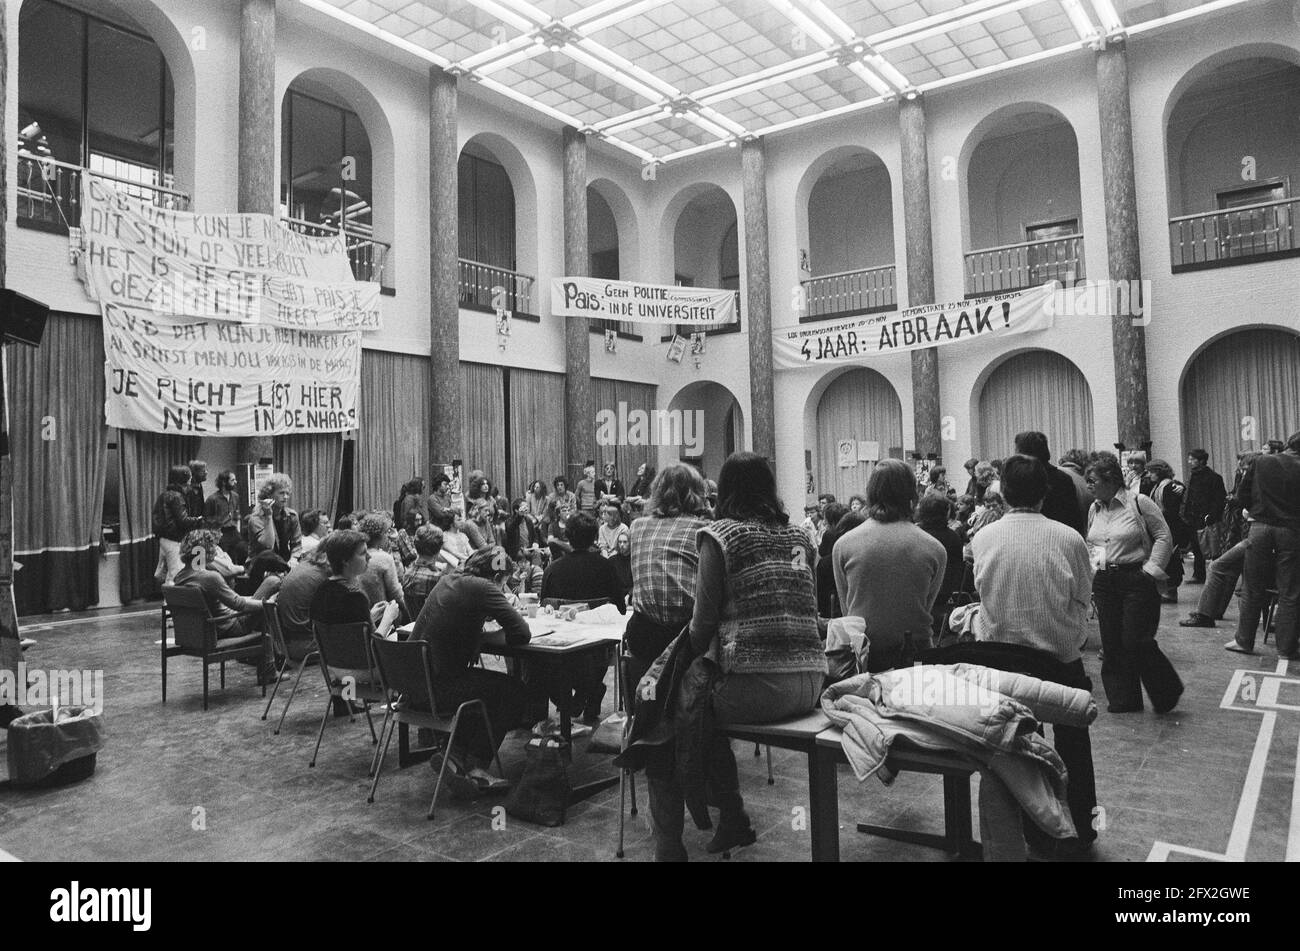 Maagdenhuis still occupied (Amsterdam), occupiers in the hall (meeting), 23 November 1978, occupation, The Netherlands, 20th century press agency photo, news to remember, documentary, historic photography 1945-1990, visual stories, human history of the Twentieth Century, capturing moments in time Stock Photo